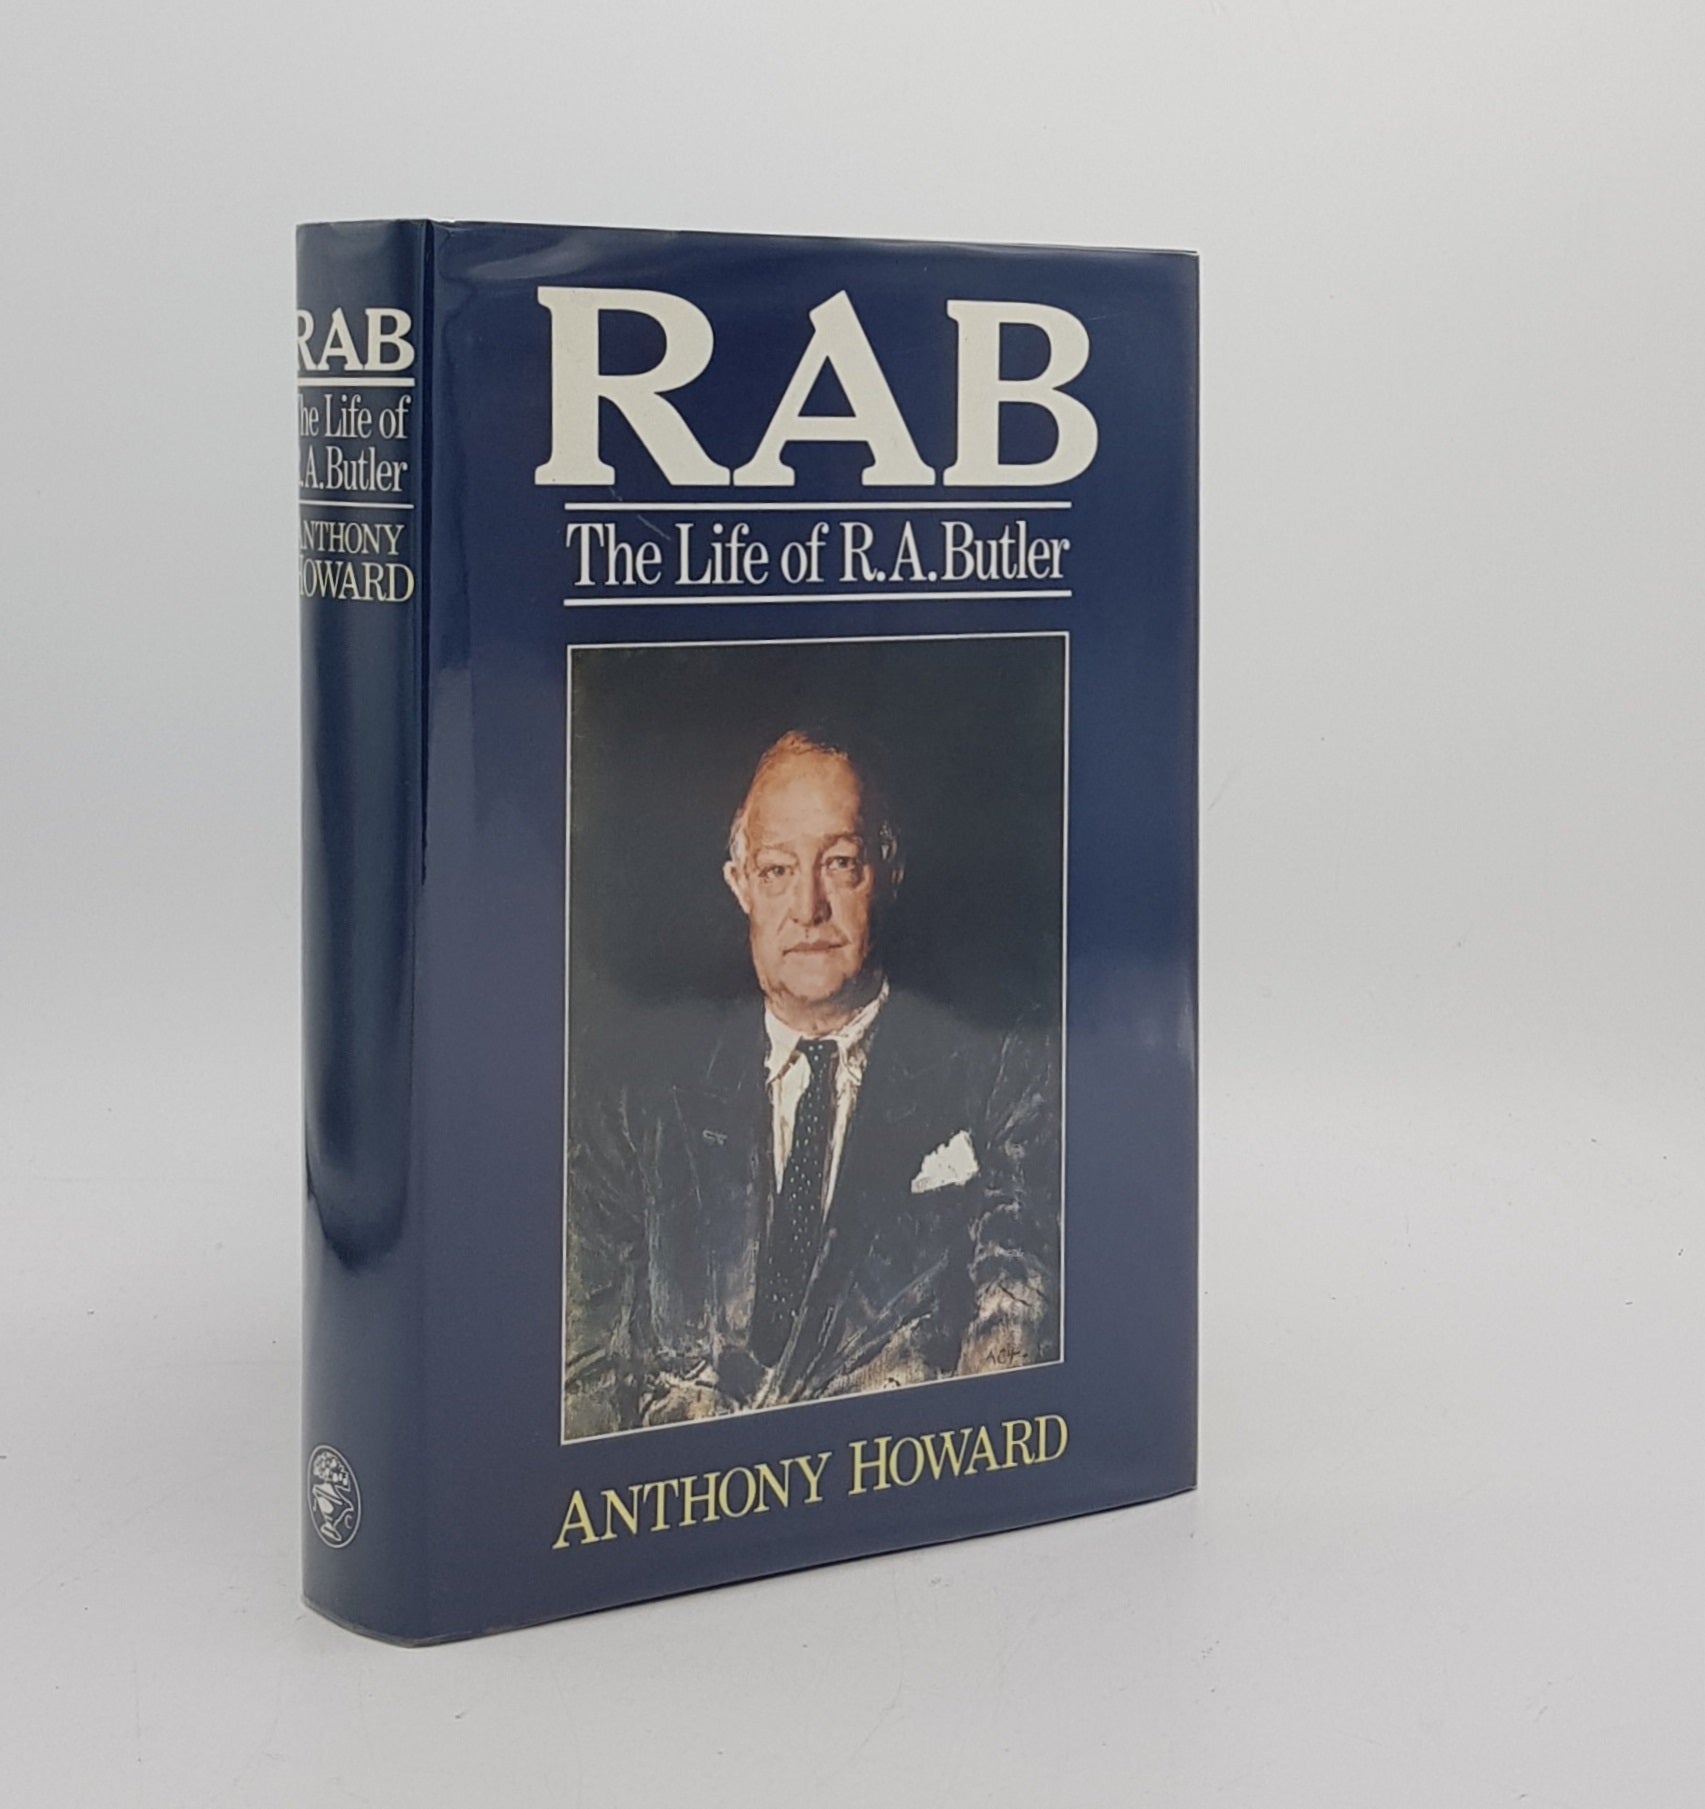 HOWARD Anthony - Rab the Life of R.A. Butler